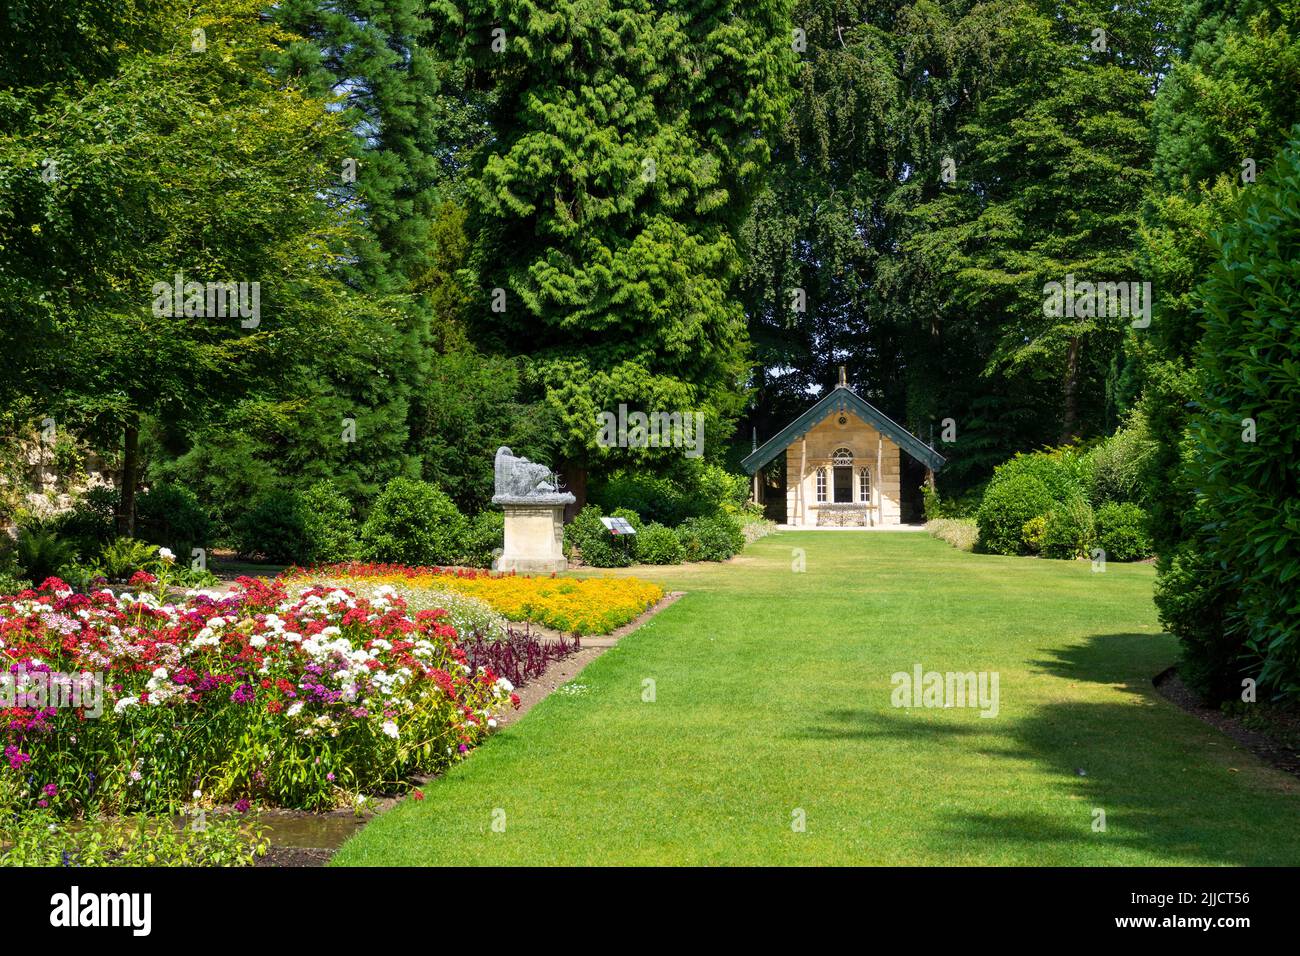 Brodsworth hall and gardens Target house and Target range a Victorian country house at Brodsworth near Doncaster South Yorkshire England uk gb Europe Stock Photo